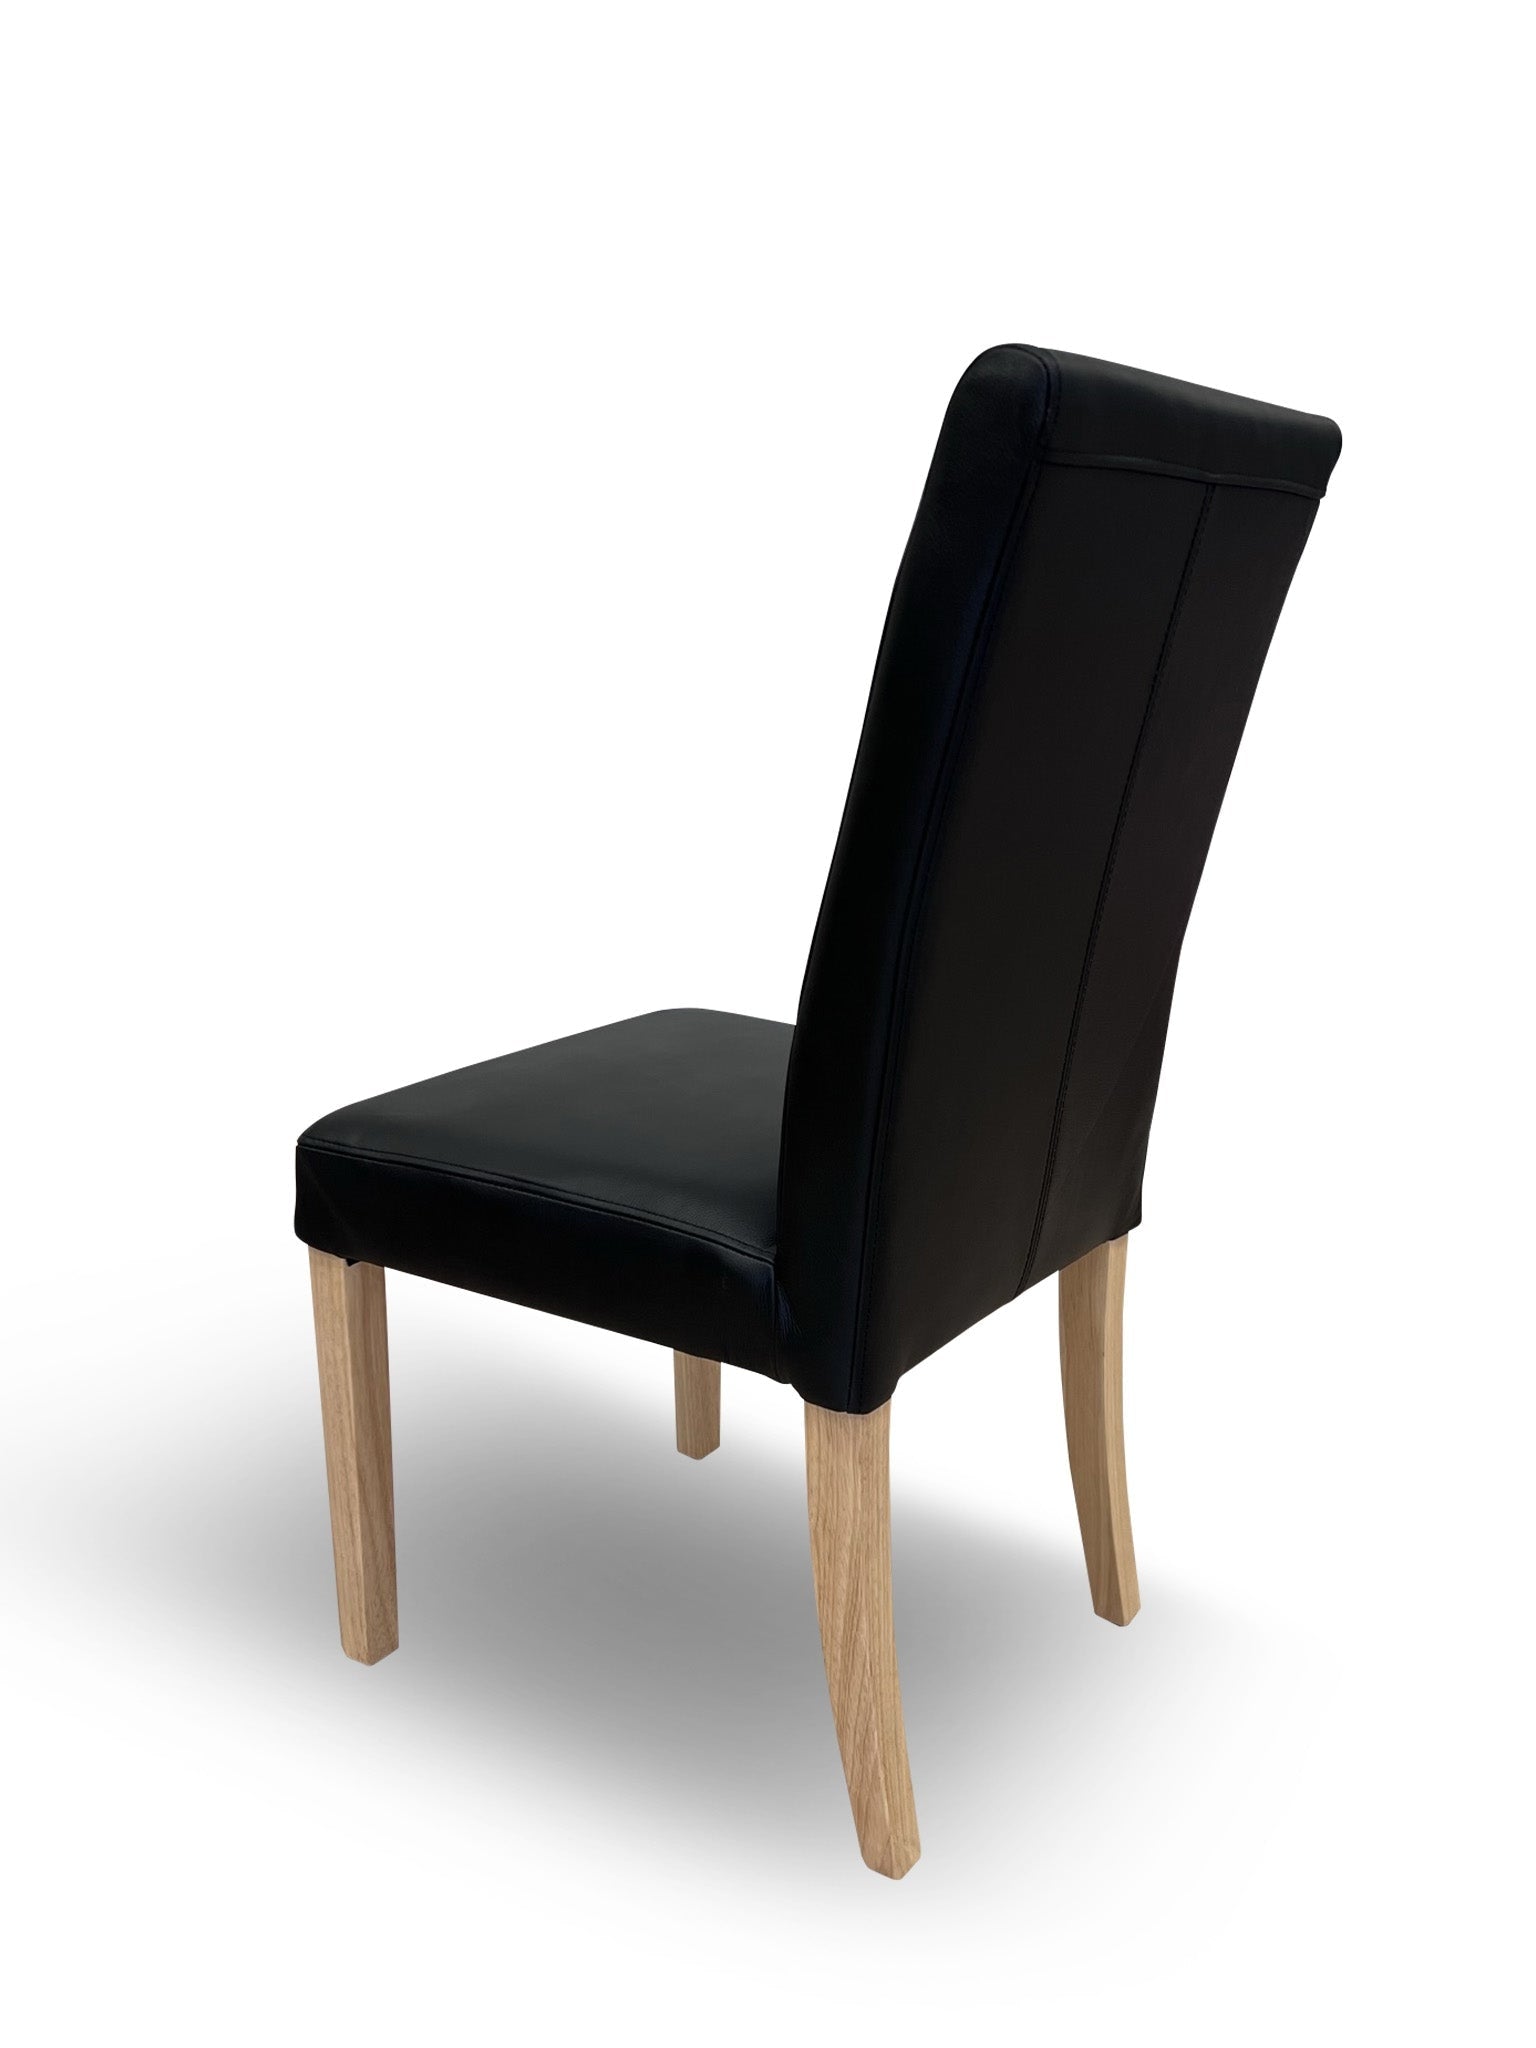 Vancouver 100% Leather Chair In Black